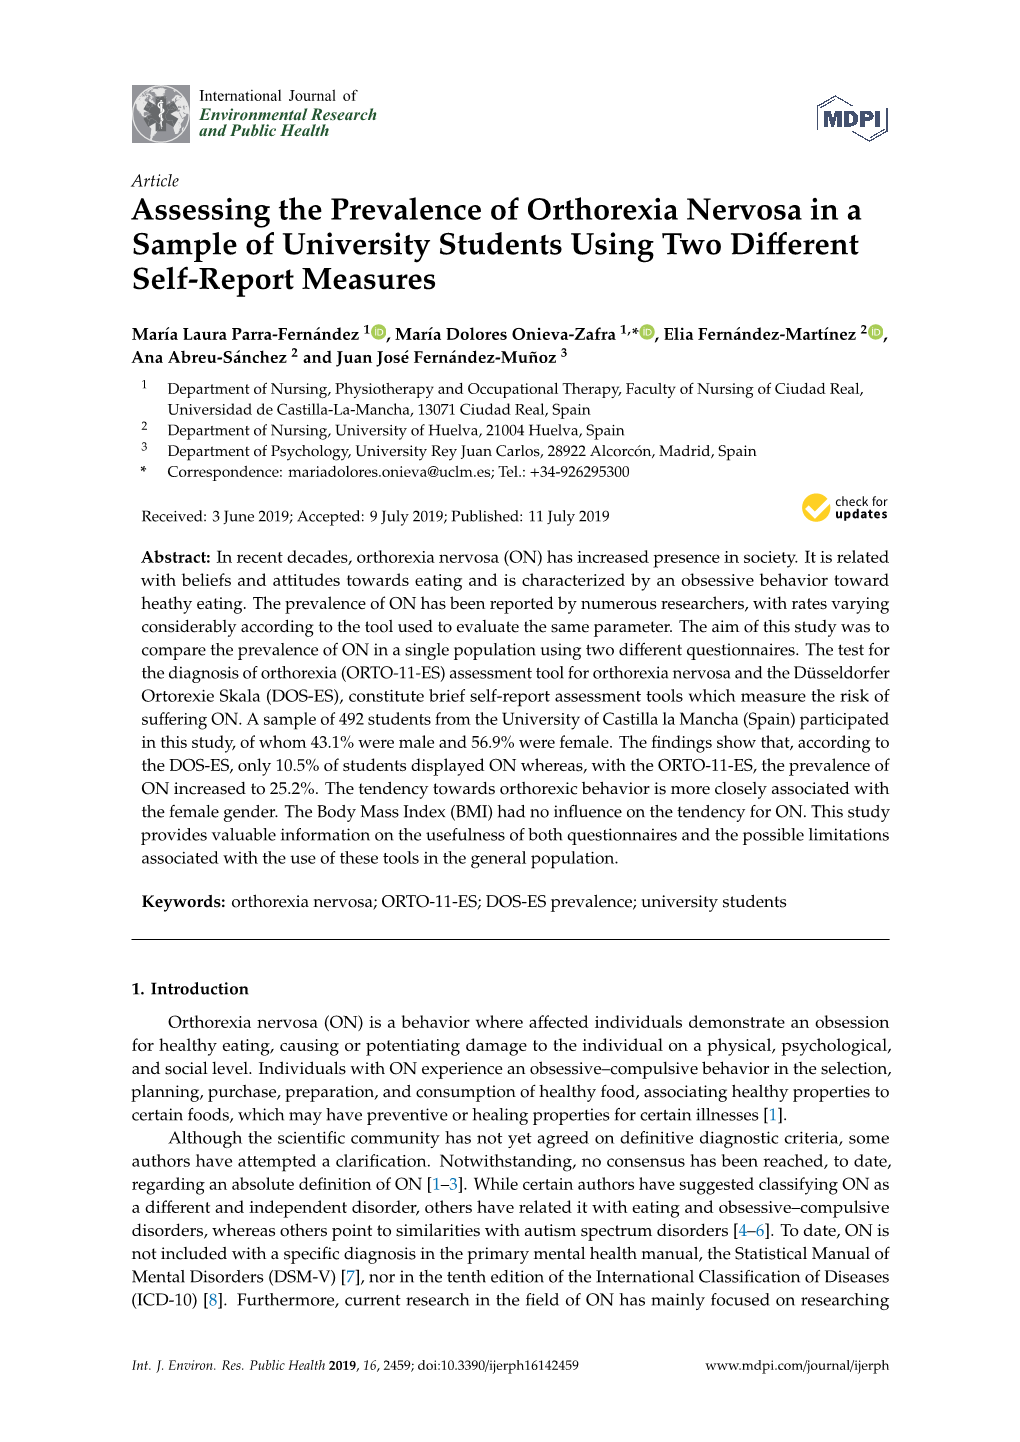 Assessing the Prevalence of Orthorexia Nervosa in a Sample of University Students Using Two Different Self-Report Measures